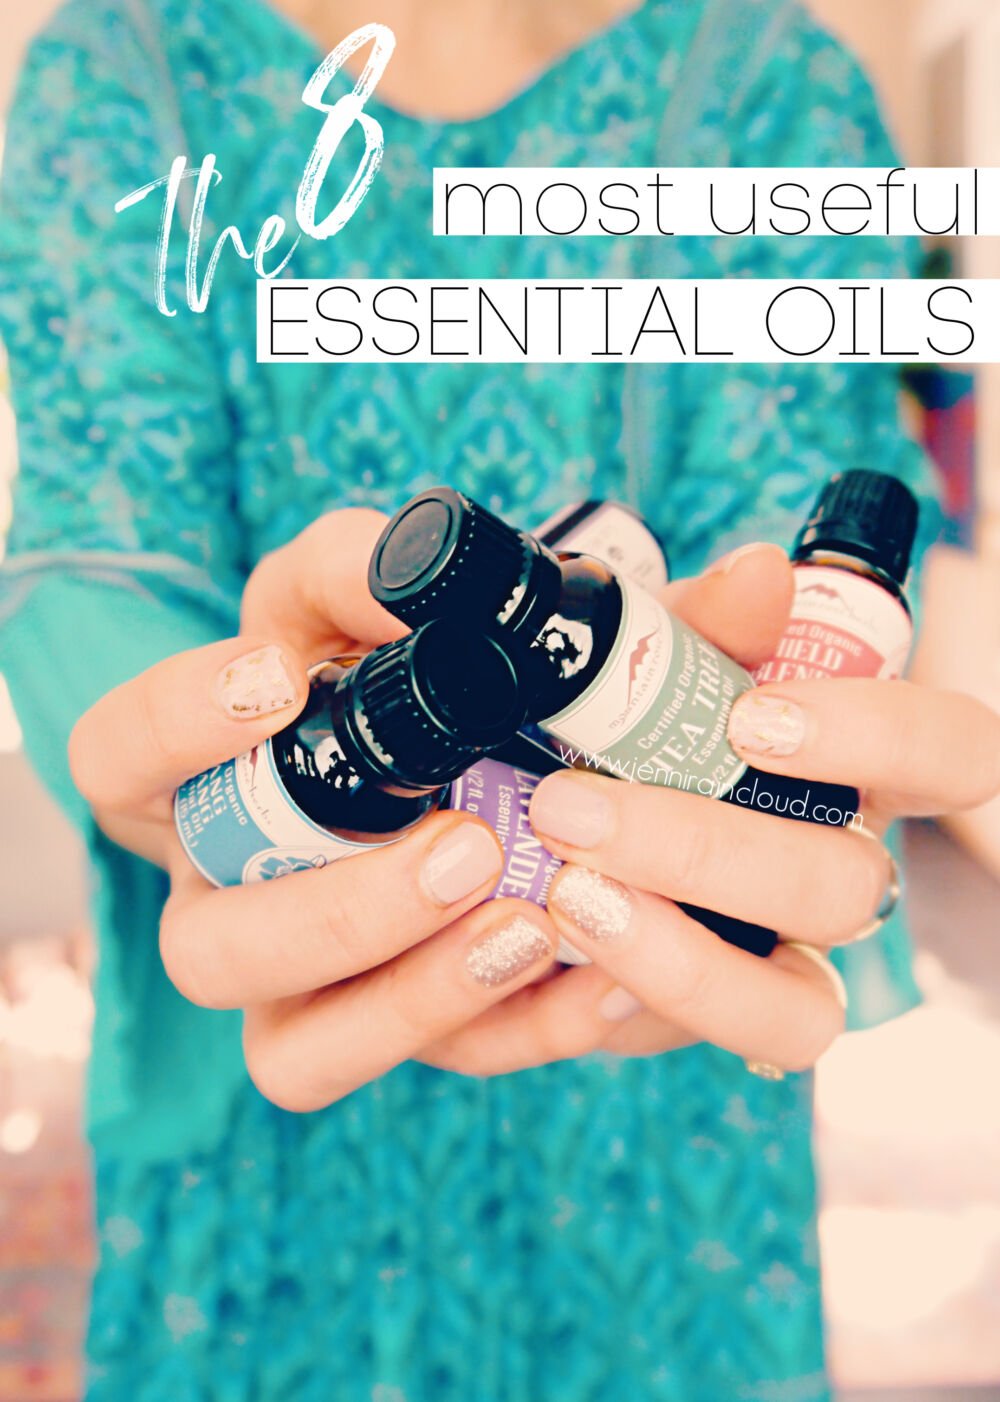 8 Most Useful Essential Oils